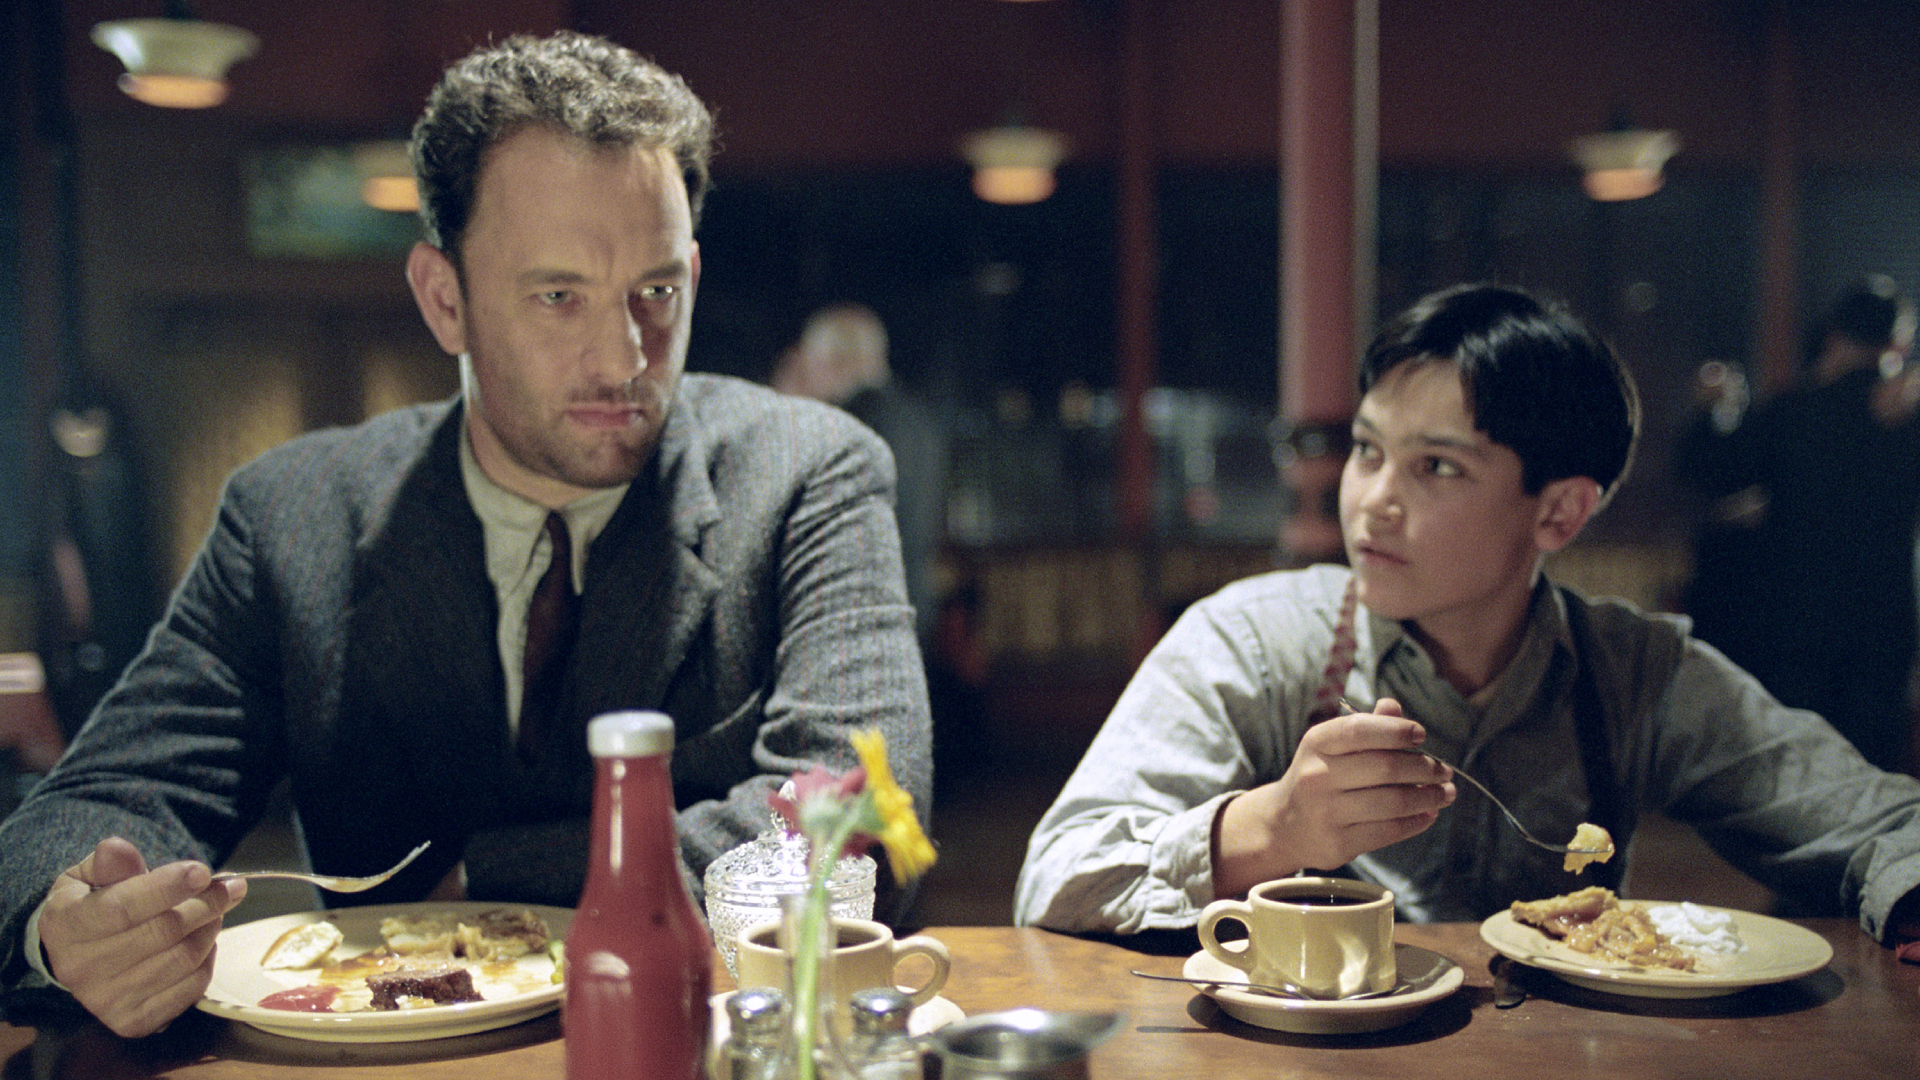 A scene from Road to Perdition